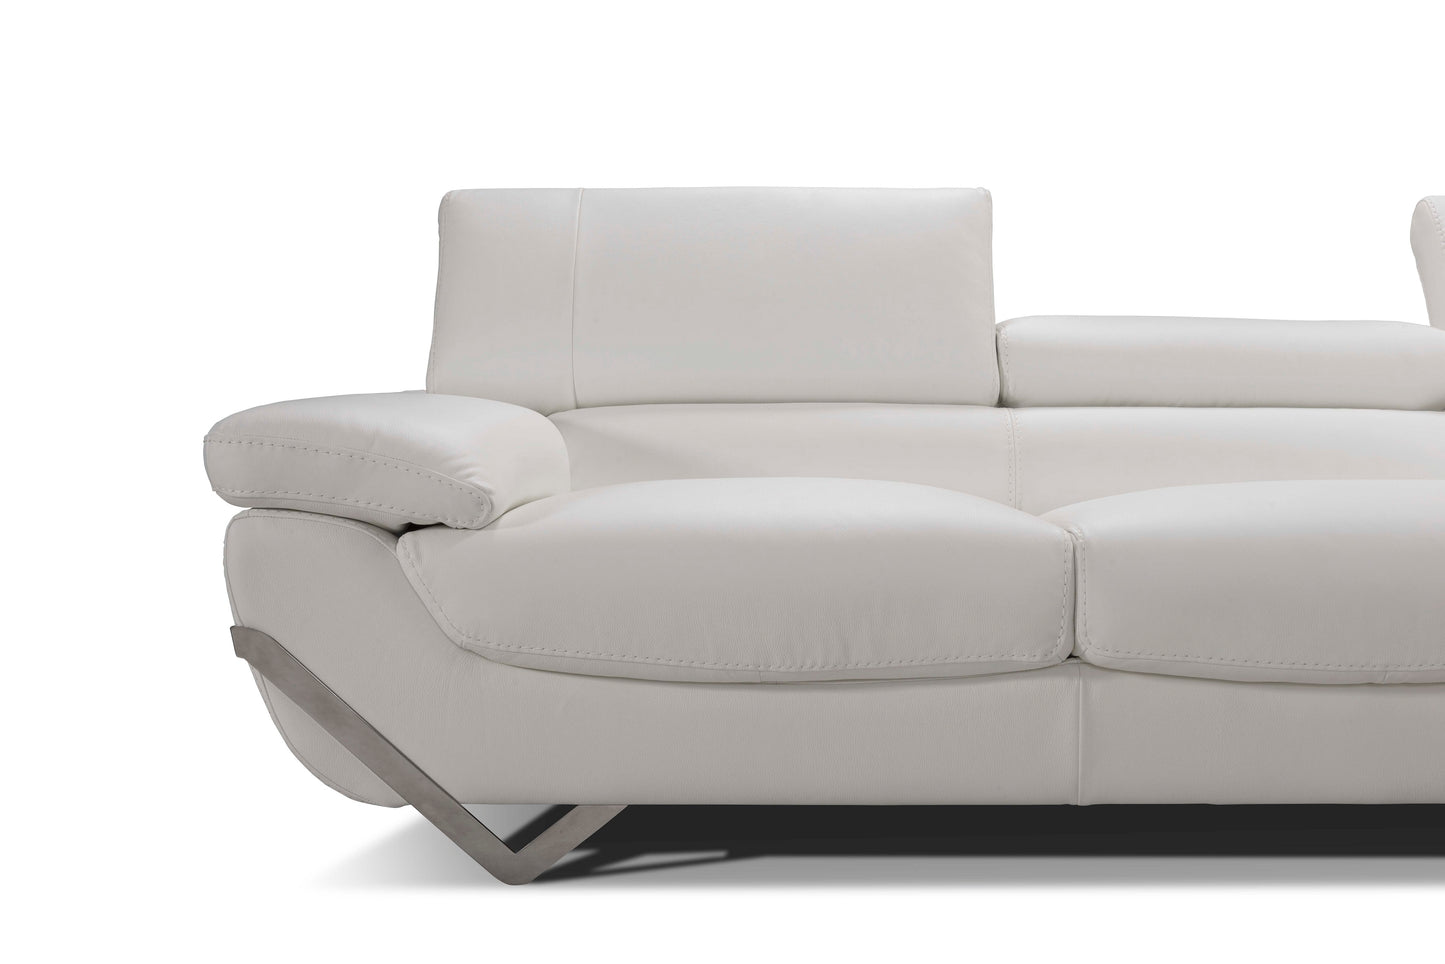 Atelier Italiana I732 White Sectional Sofa Right Facing Chaise by Incanto